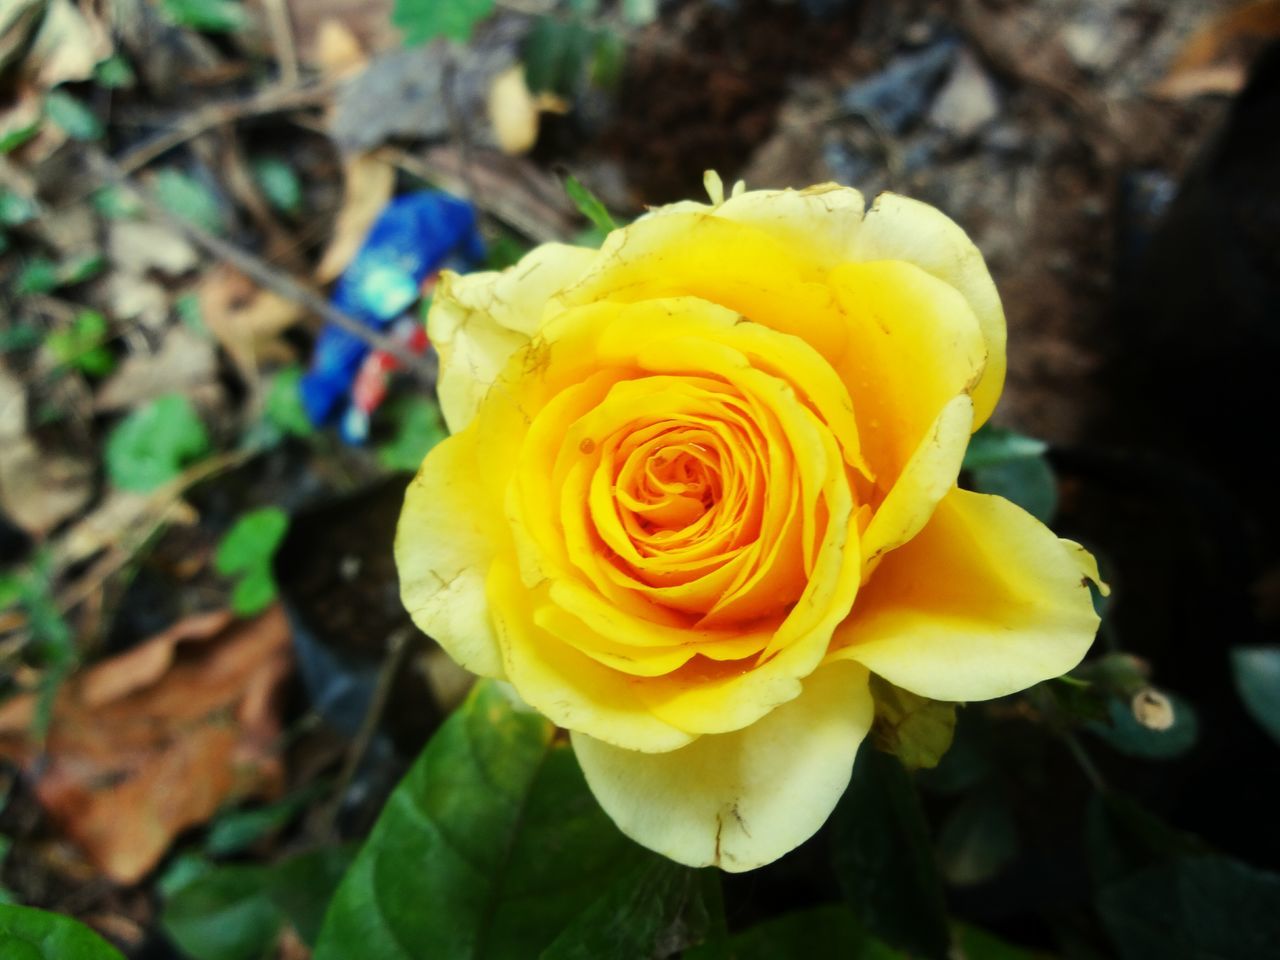 flower, petal, flower head, fragility, freshness, rose - flower, beauty in nature, close-up, yellow, growth, single flower, blooming, focus on foreground, nature, plant, in bloom, rose, blossom, outdoors, high angle view